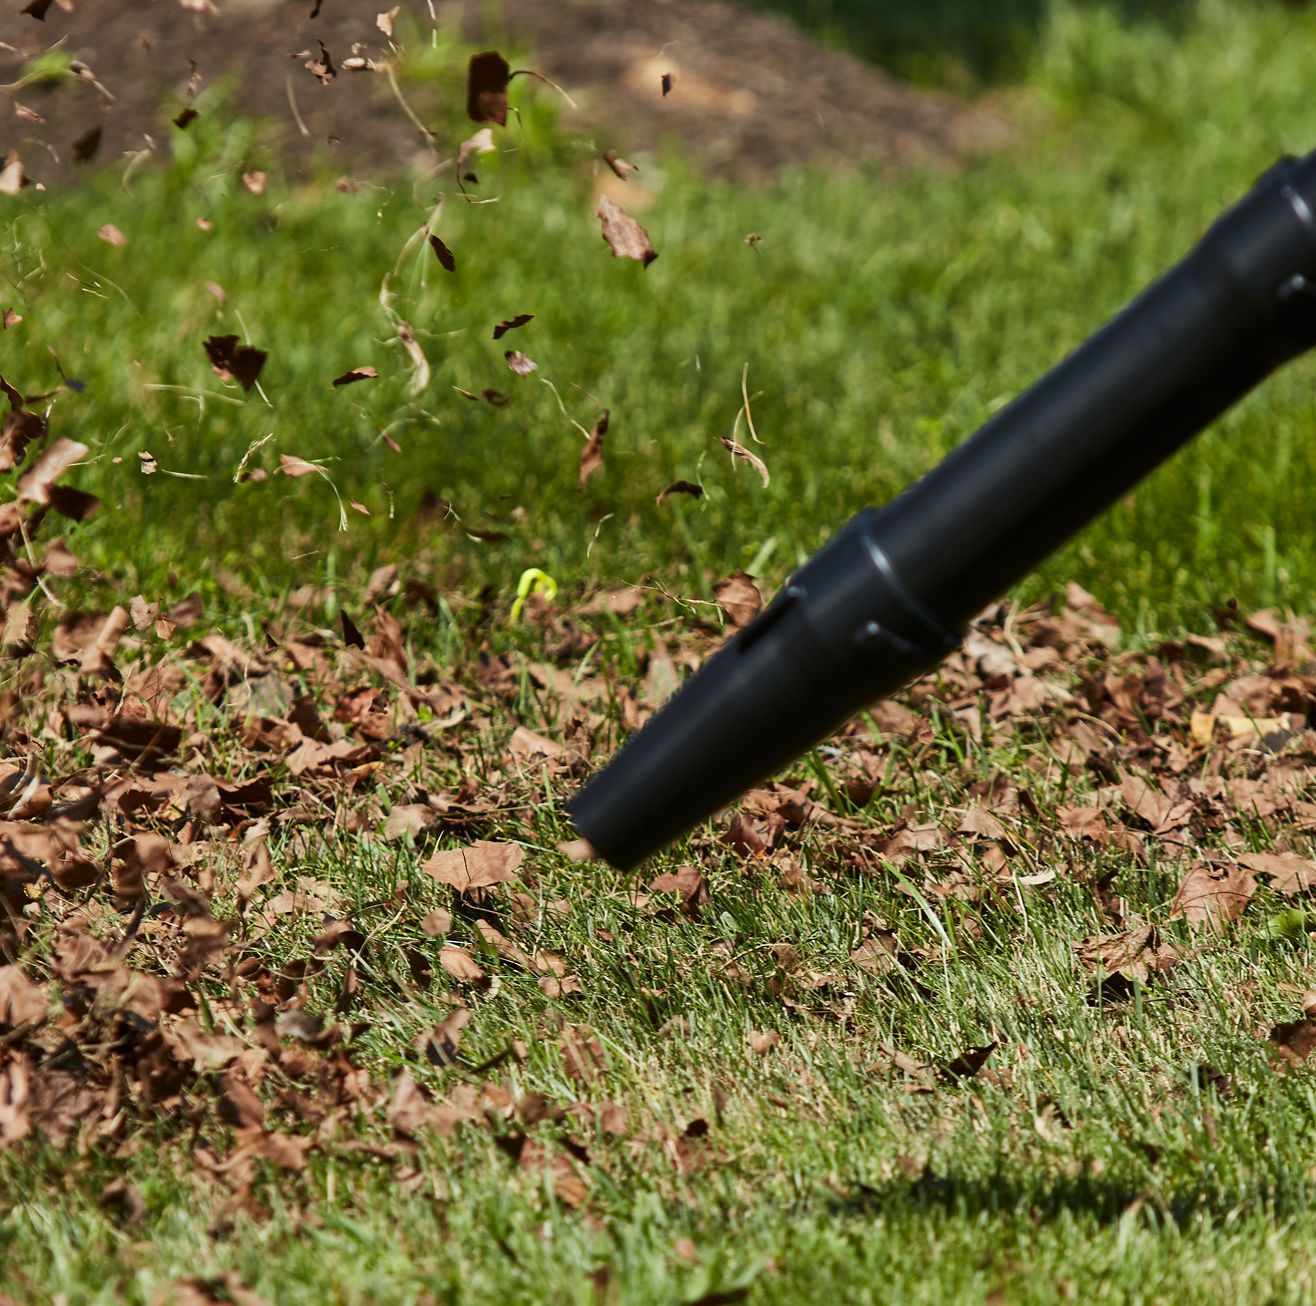 Don't Believe the Headlines: You Can Use a Leaf Blower Responsibly